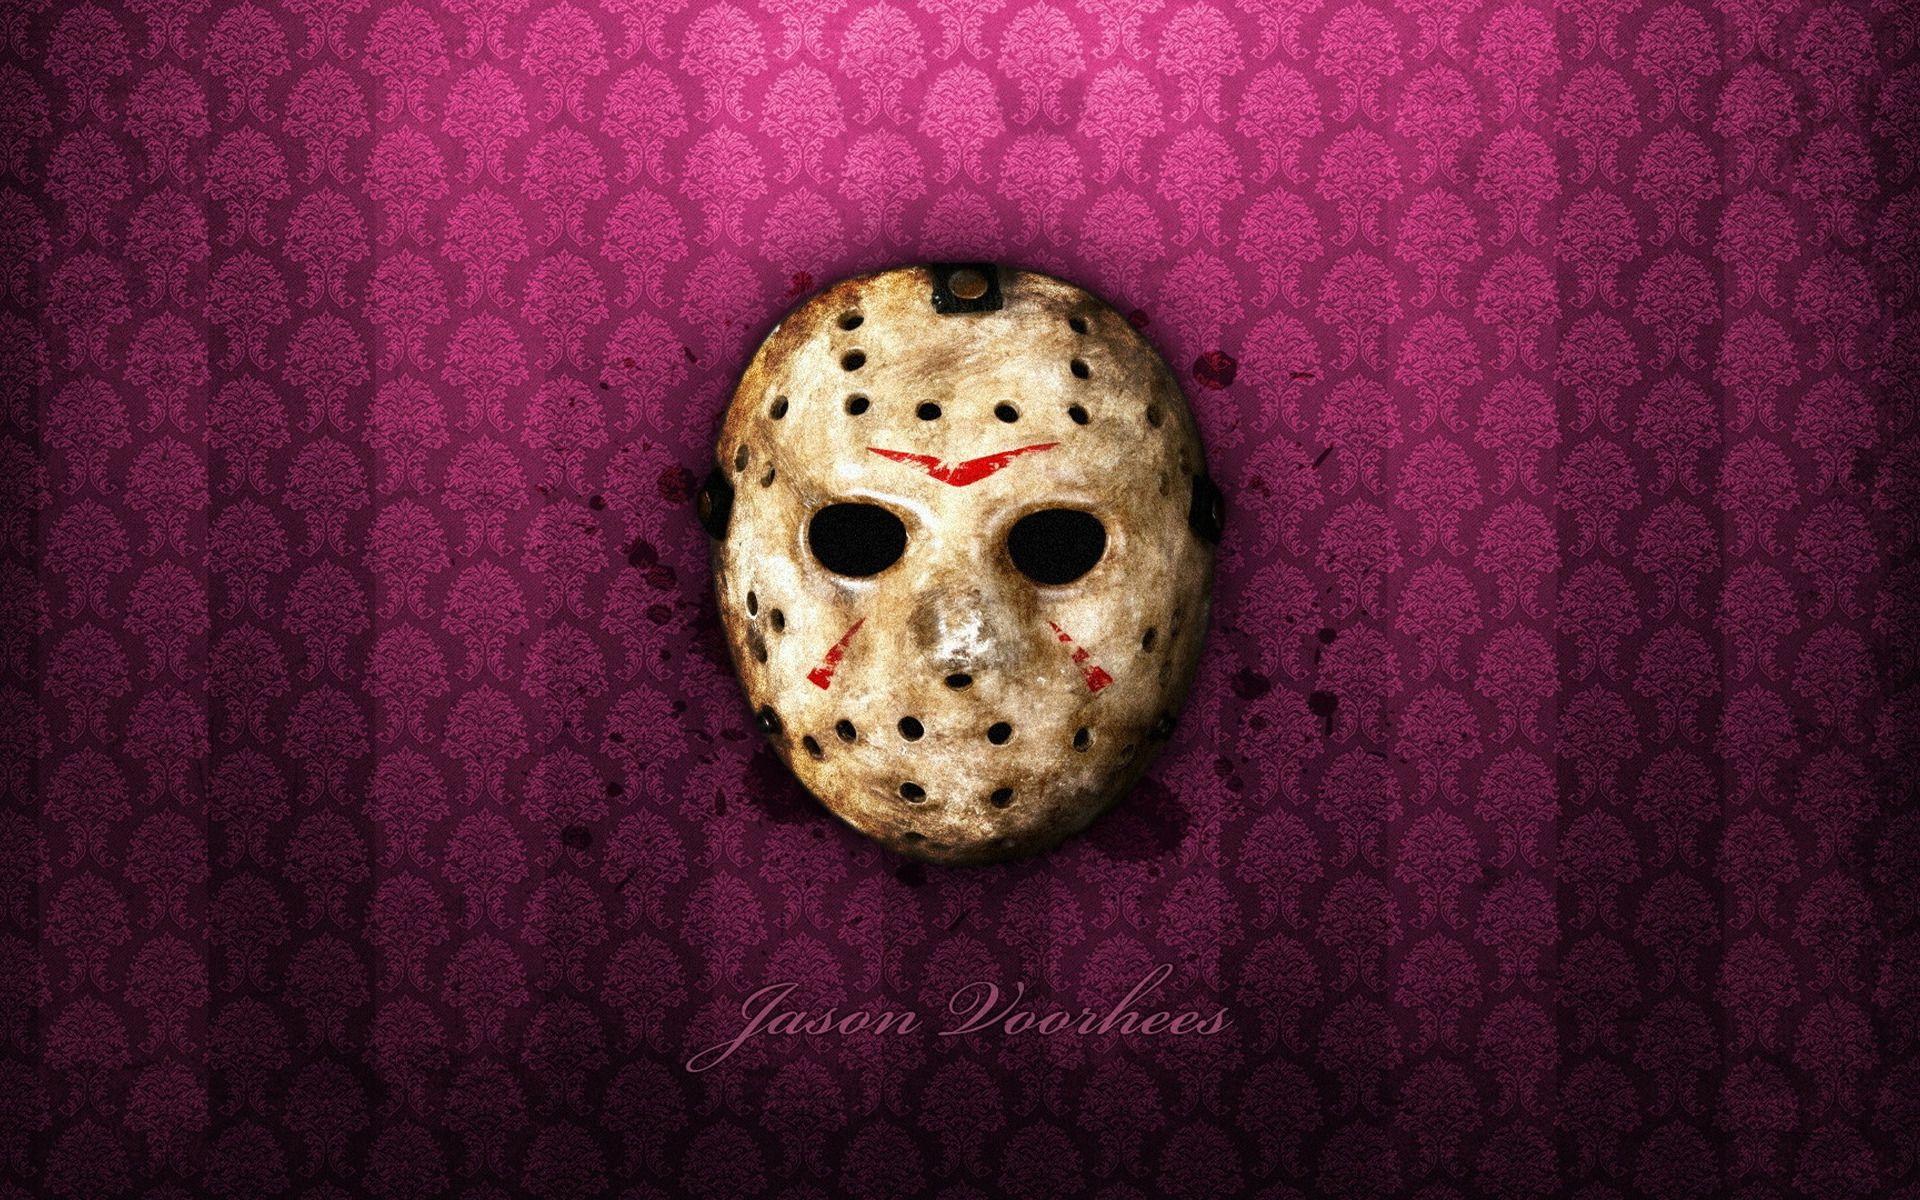 Jason Voorhees wallpaperd and abstract